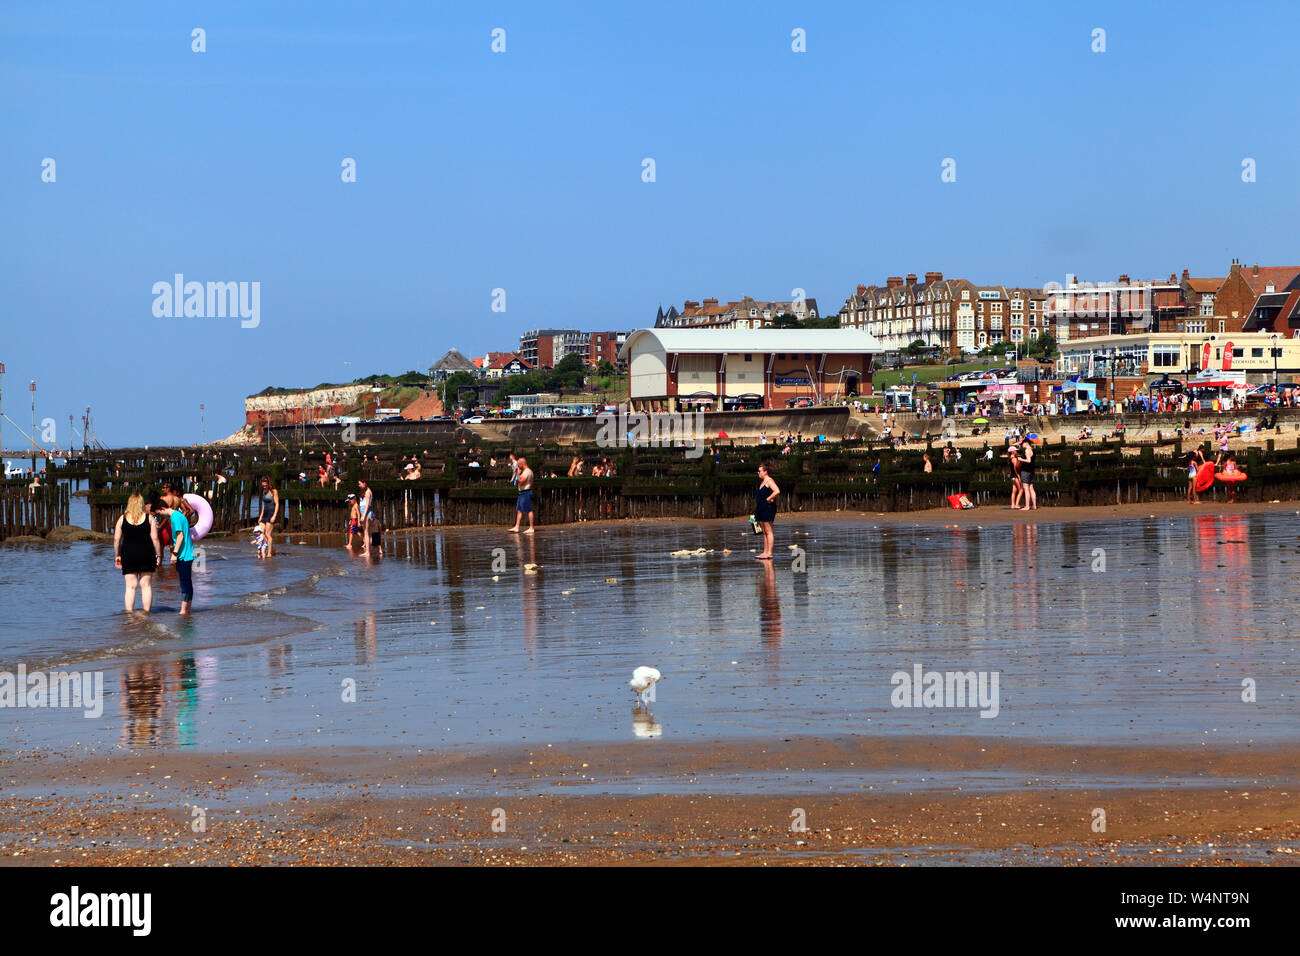 Hunstanton, seaside resort, beach, town, striped cliffs, holiday makers, visitors, tourists, Norfolk, England, UK Stock Photo